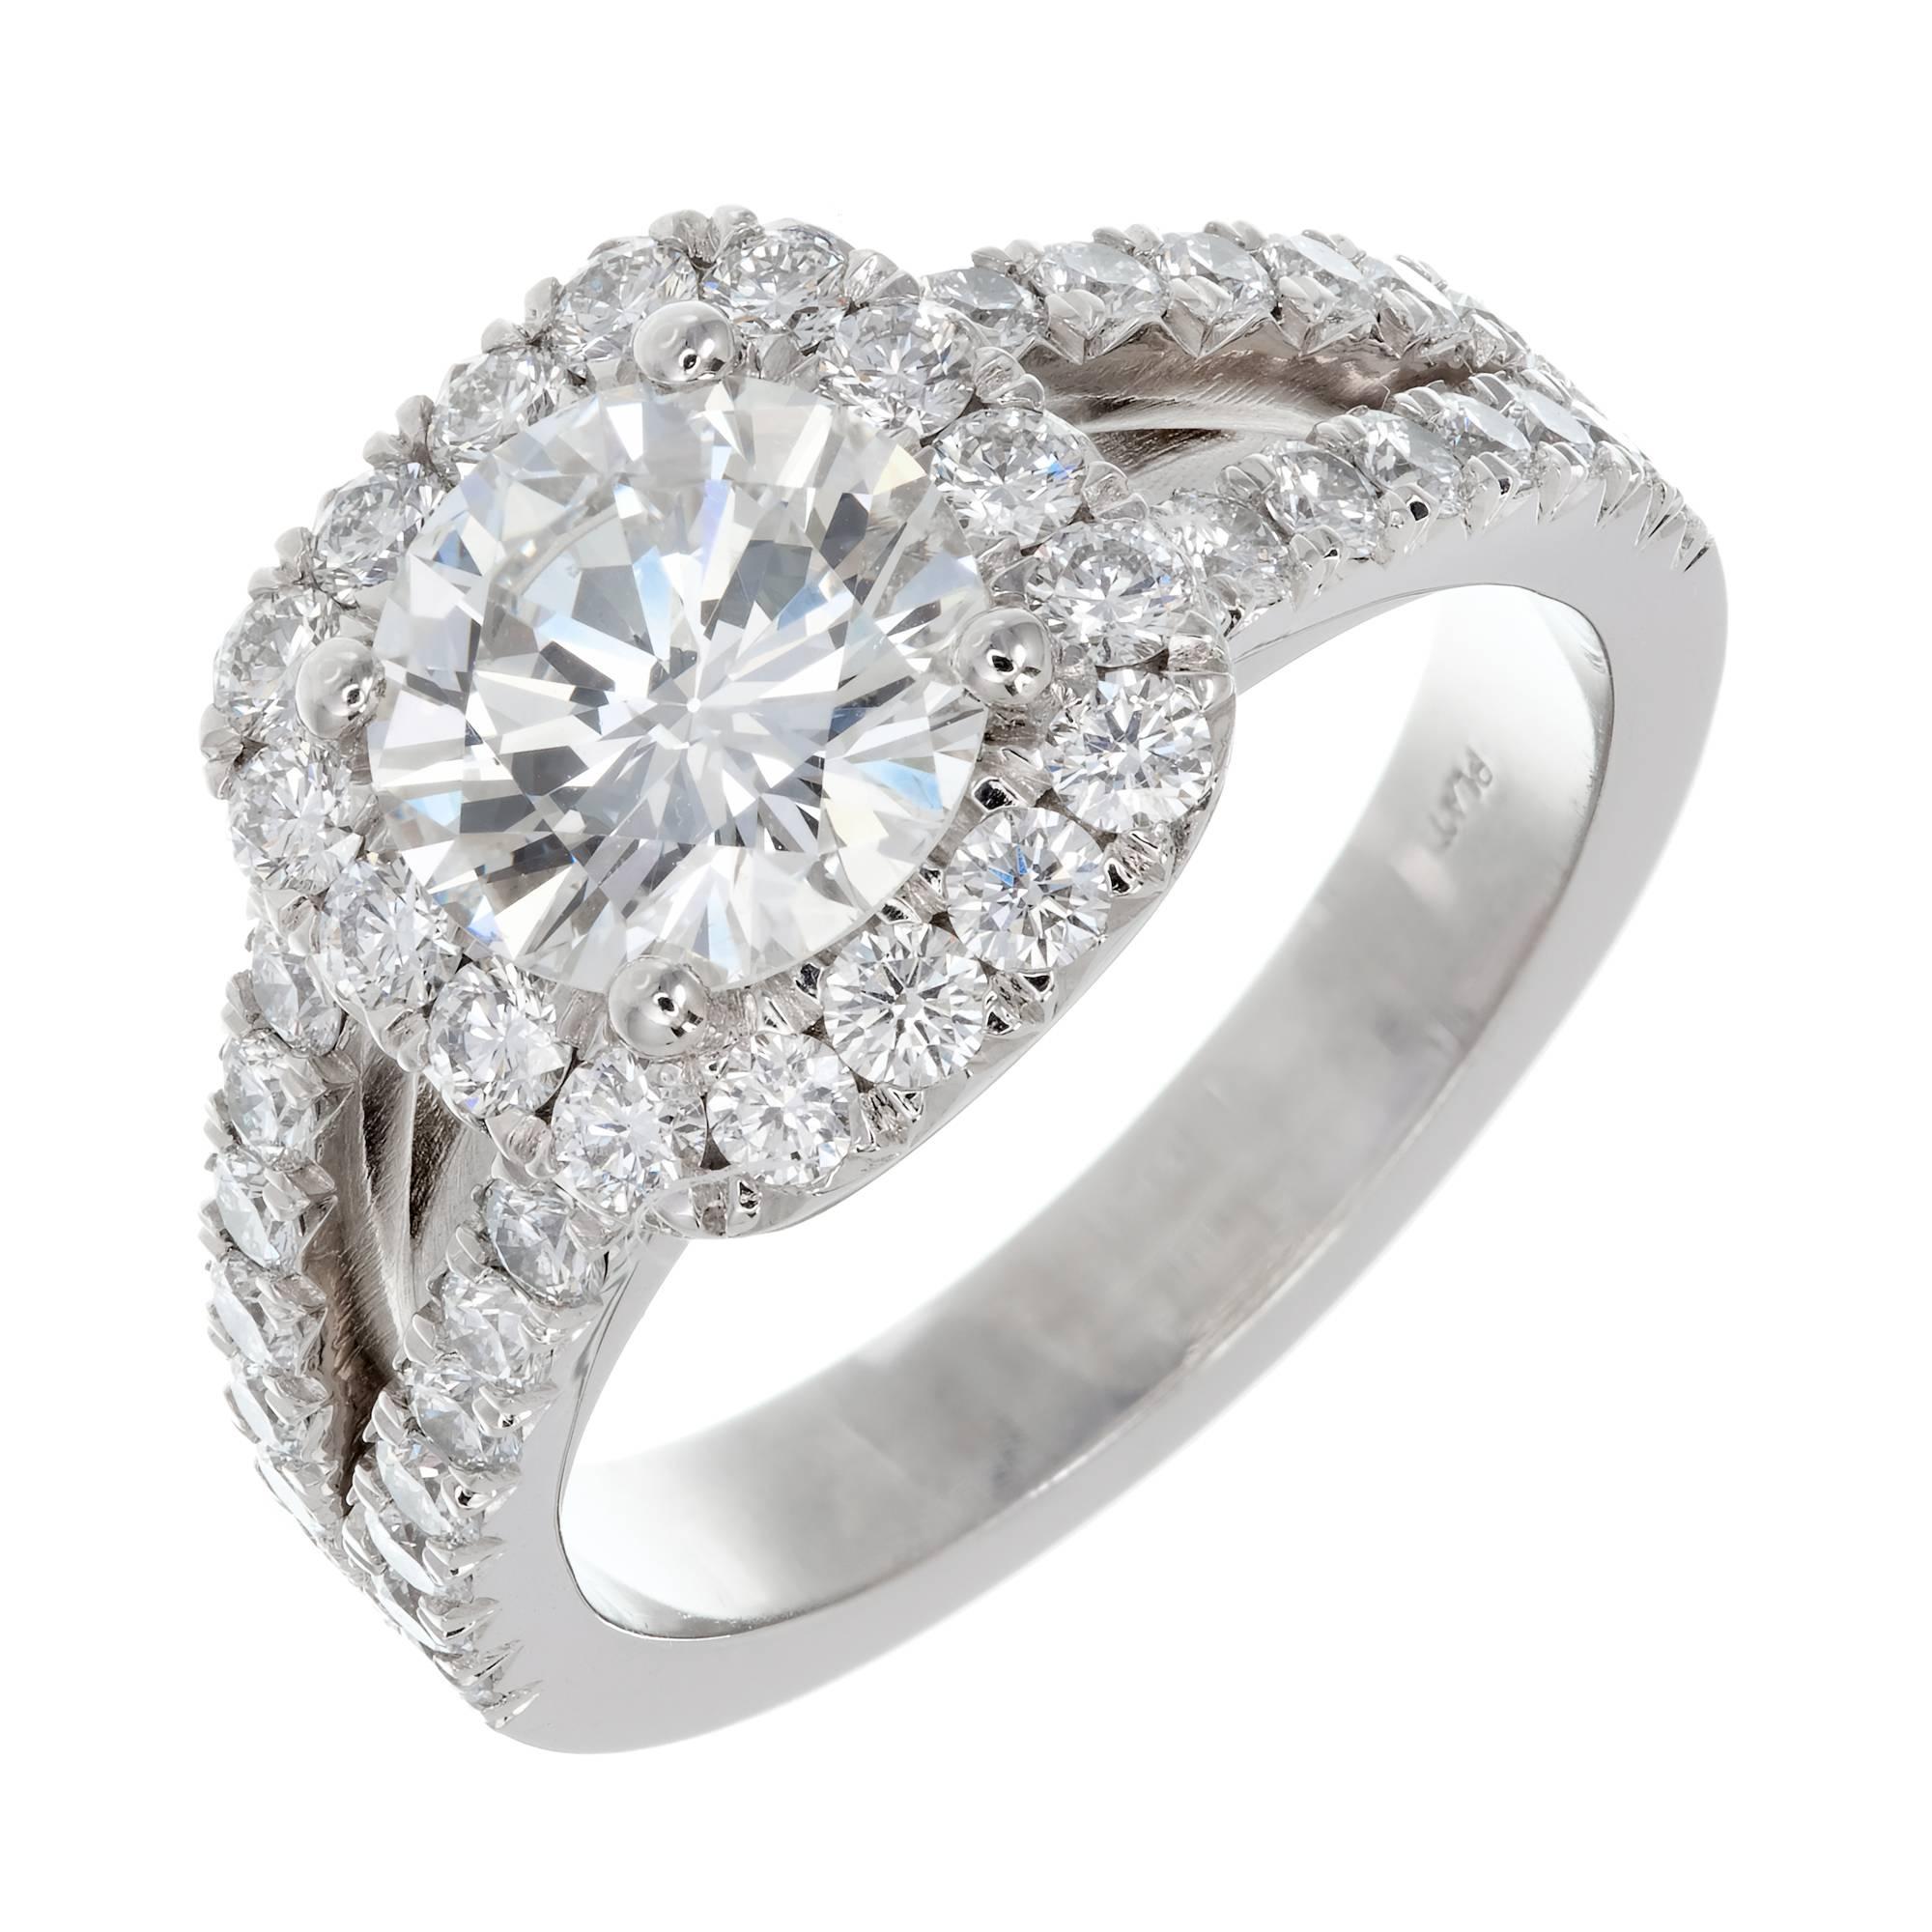 Peter Suchy custom cushion halo split shank Diamond engagement ring with Ideal cut Diamonds that are bright white and brilliant surrounding a traditional Ideal cut round center Diamond. The ring is brand new from the Peter Suchy Workshop designed